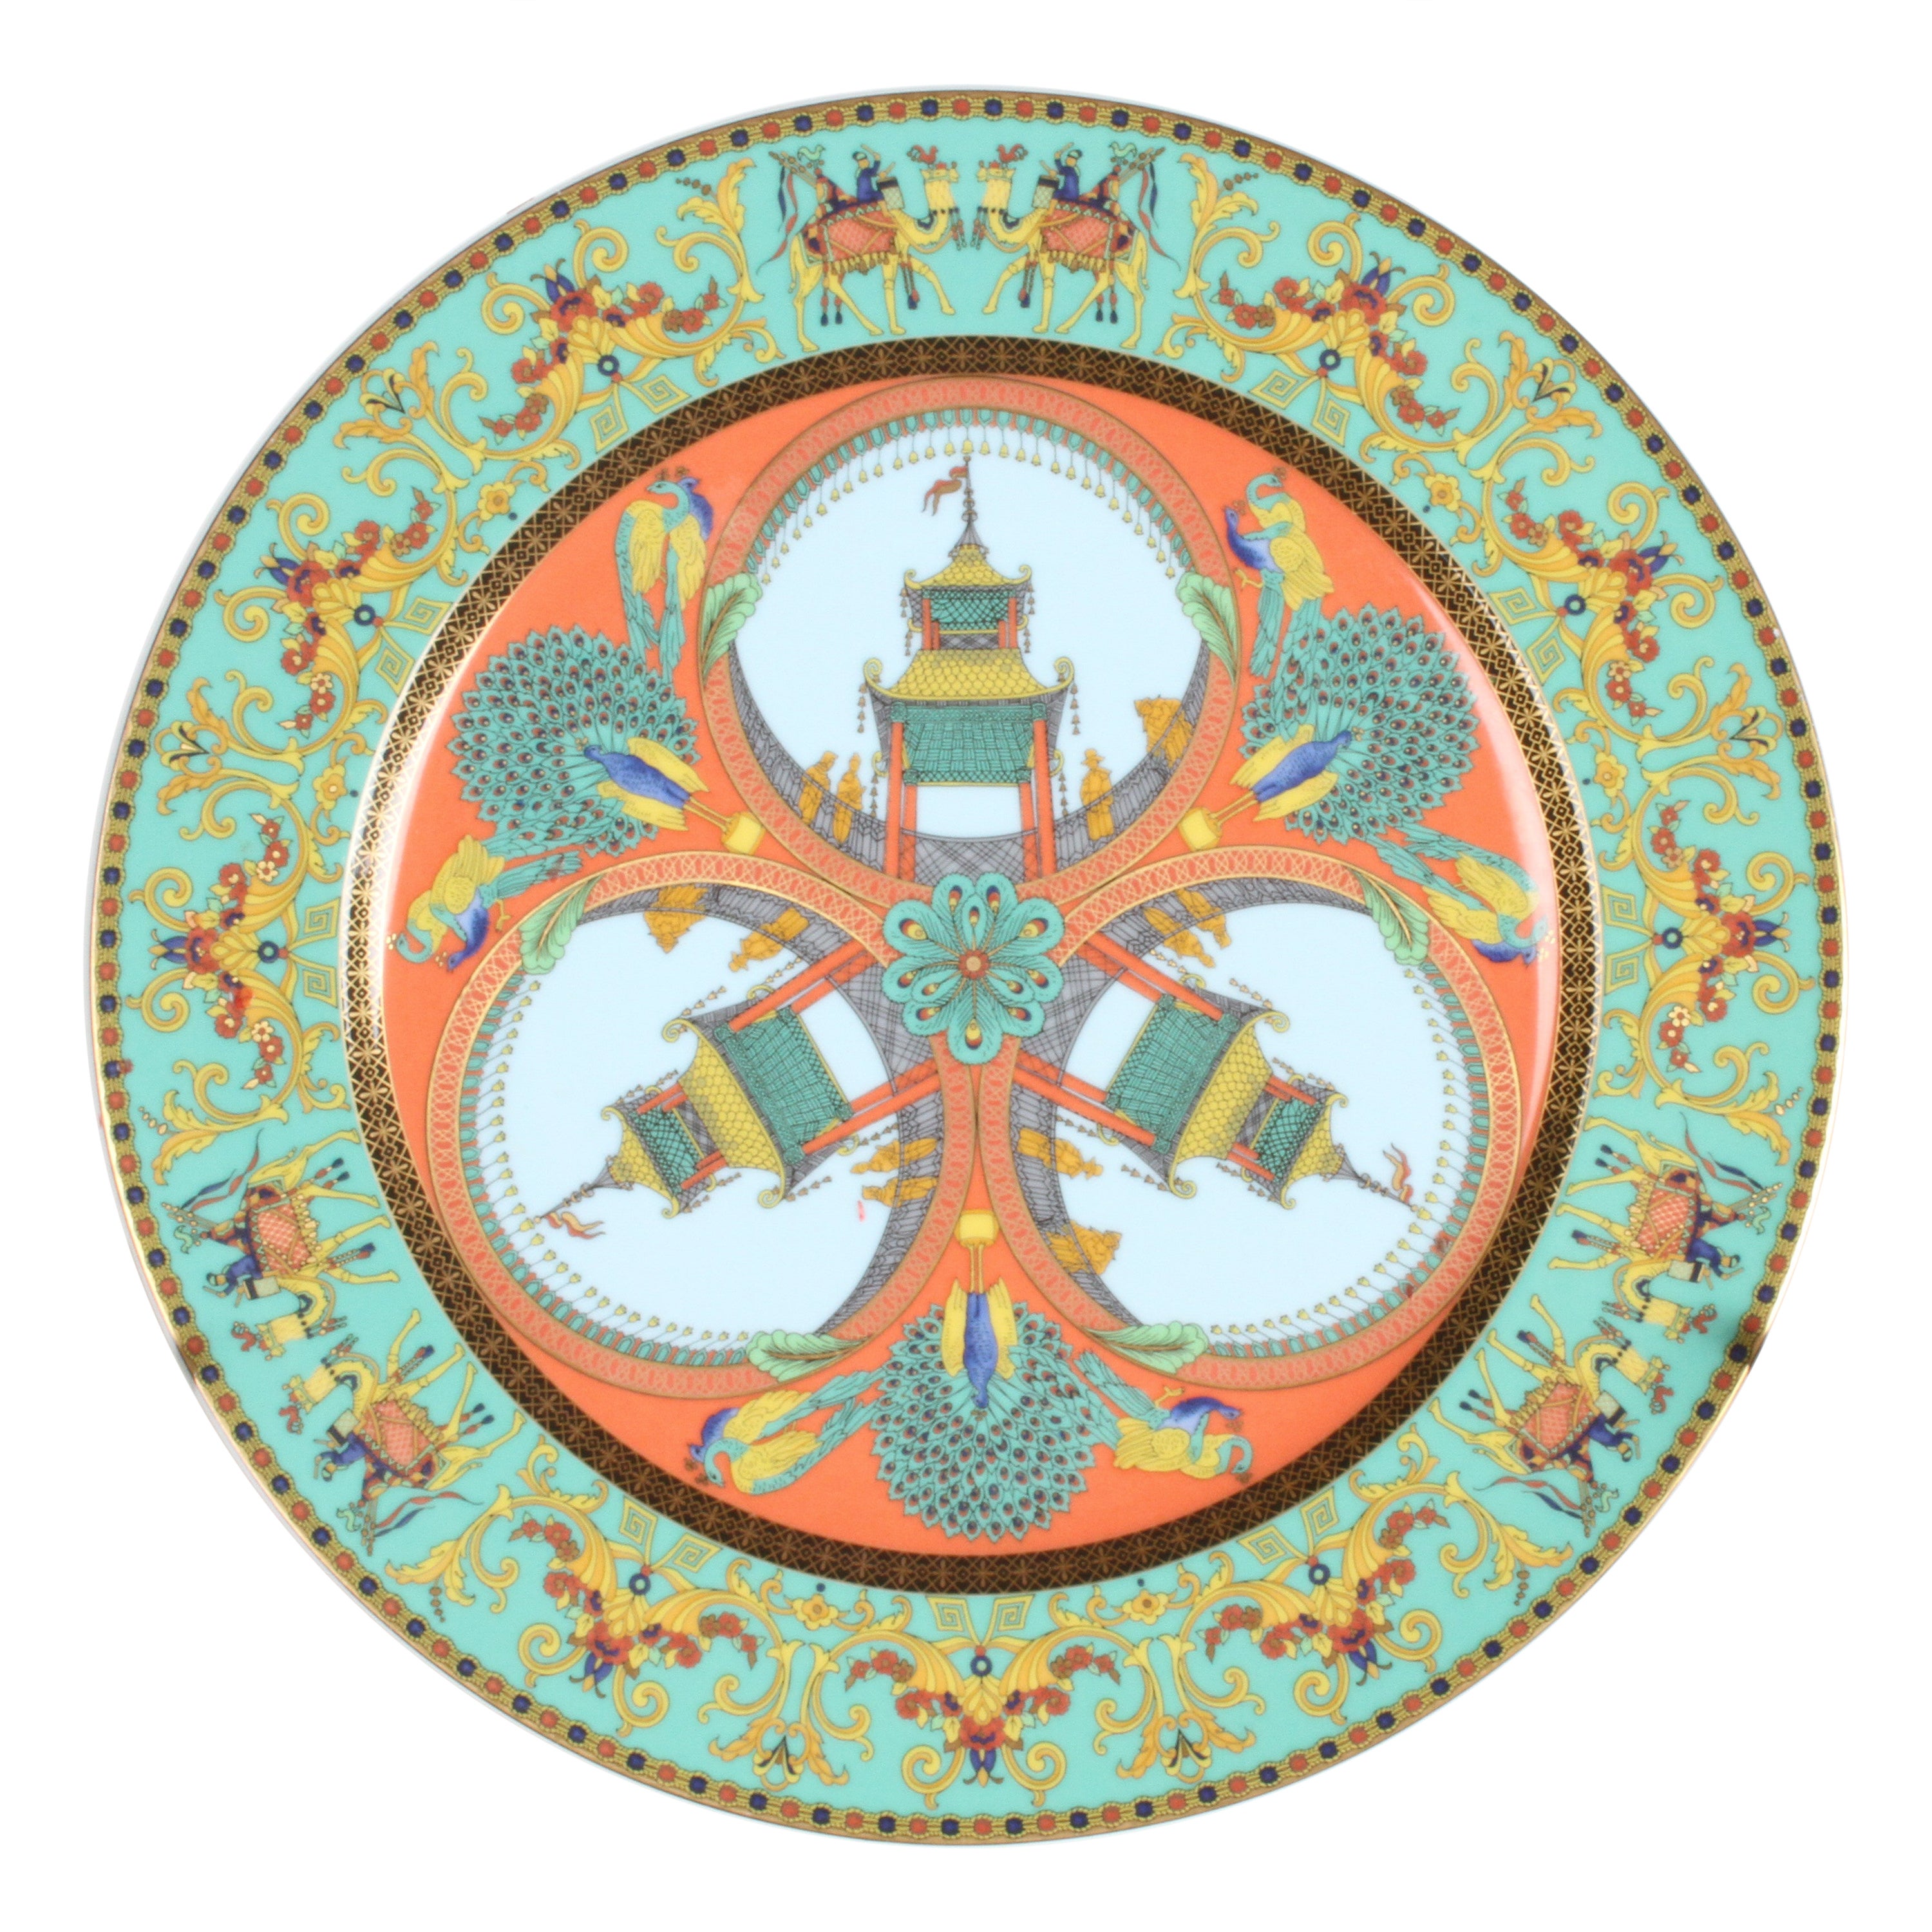 Gianni Versace for Rosenthal "Le voyage de Marco Polo" Porcelain Display Plate  For Sale